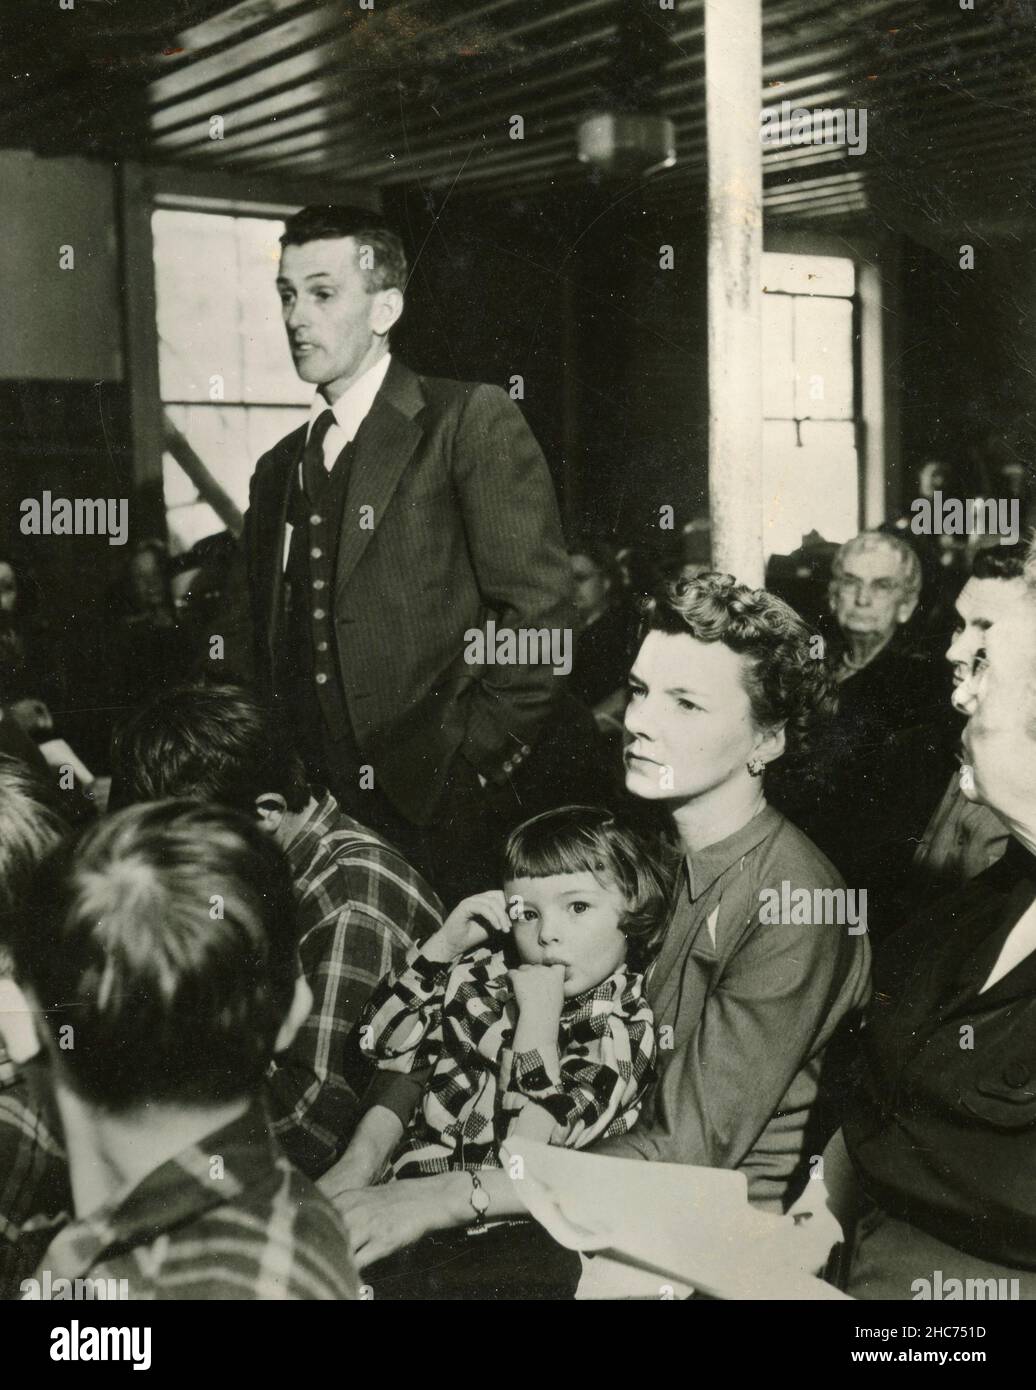 Local Government Town Meeting in a Vermont Small Town, USA 1956 Stock Photo